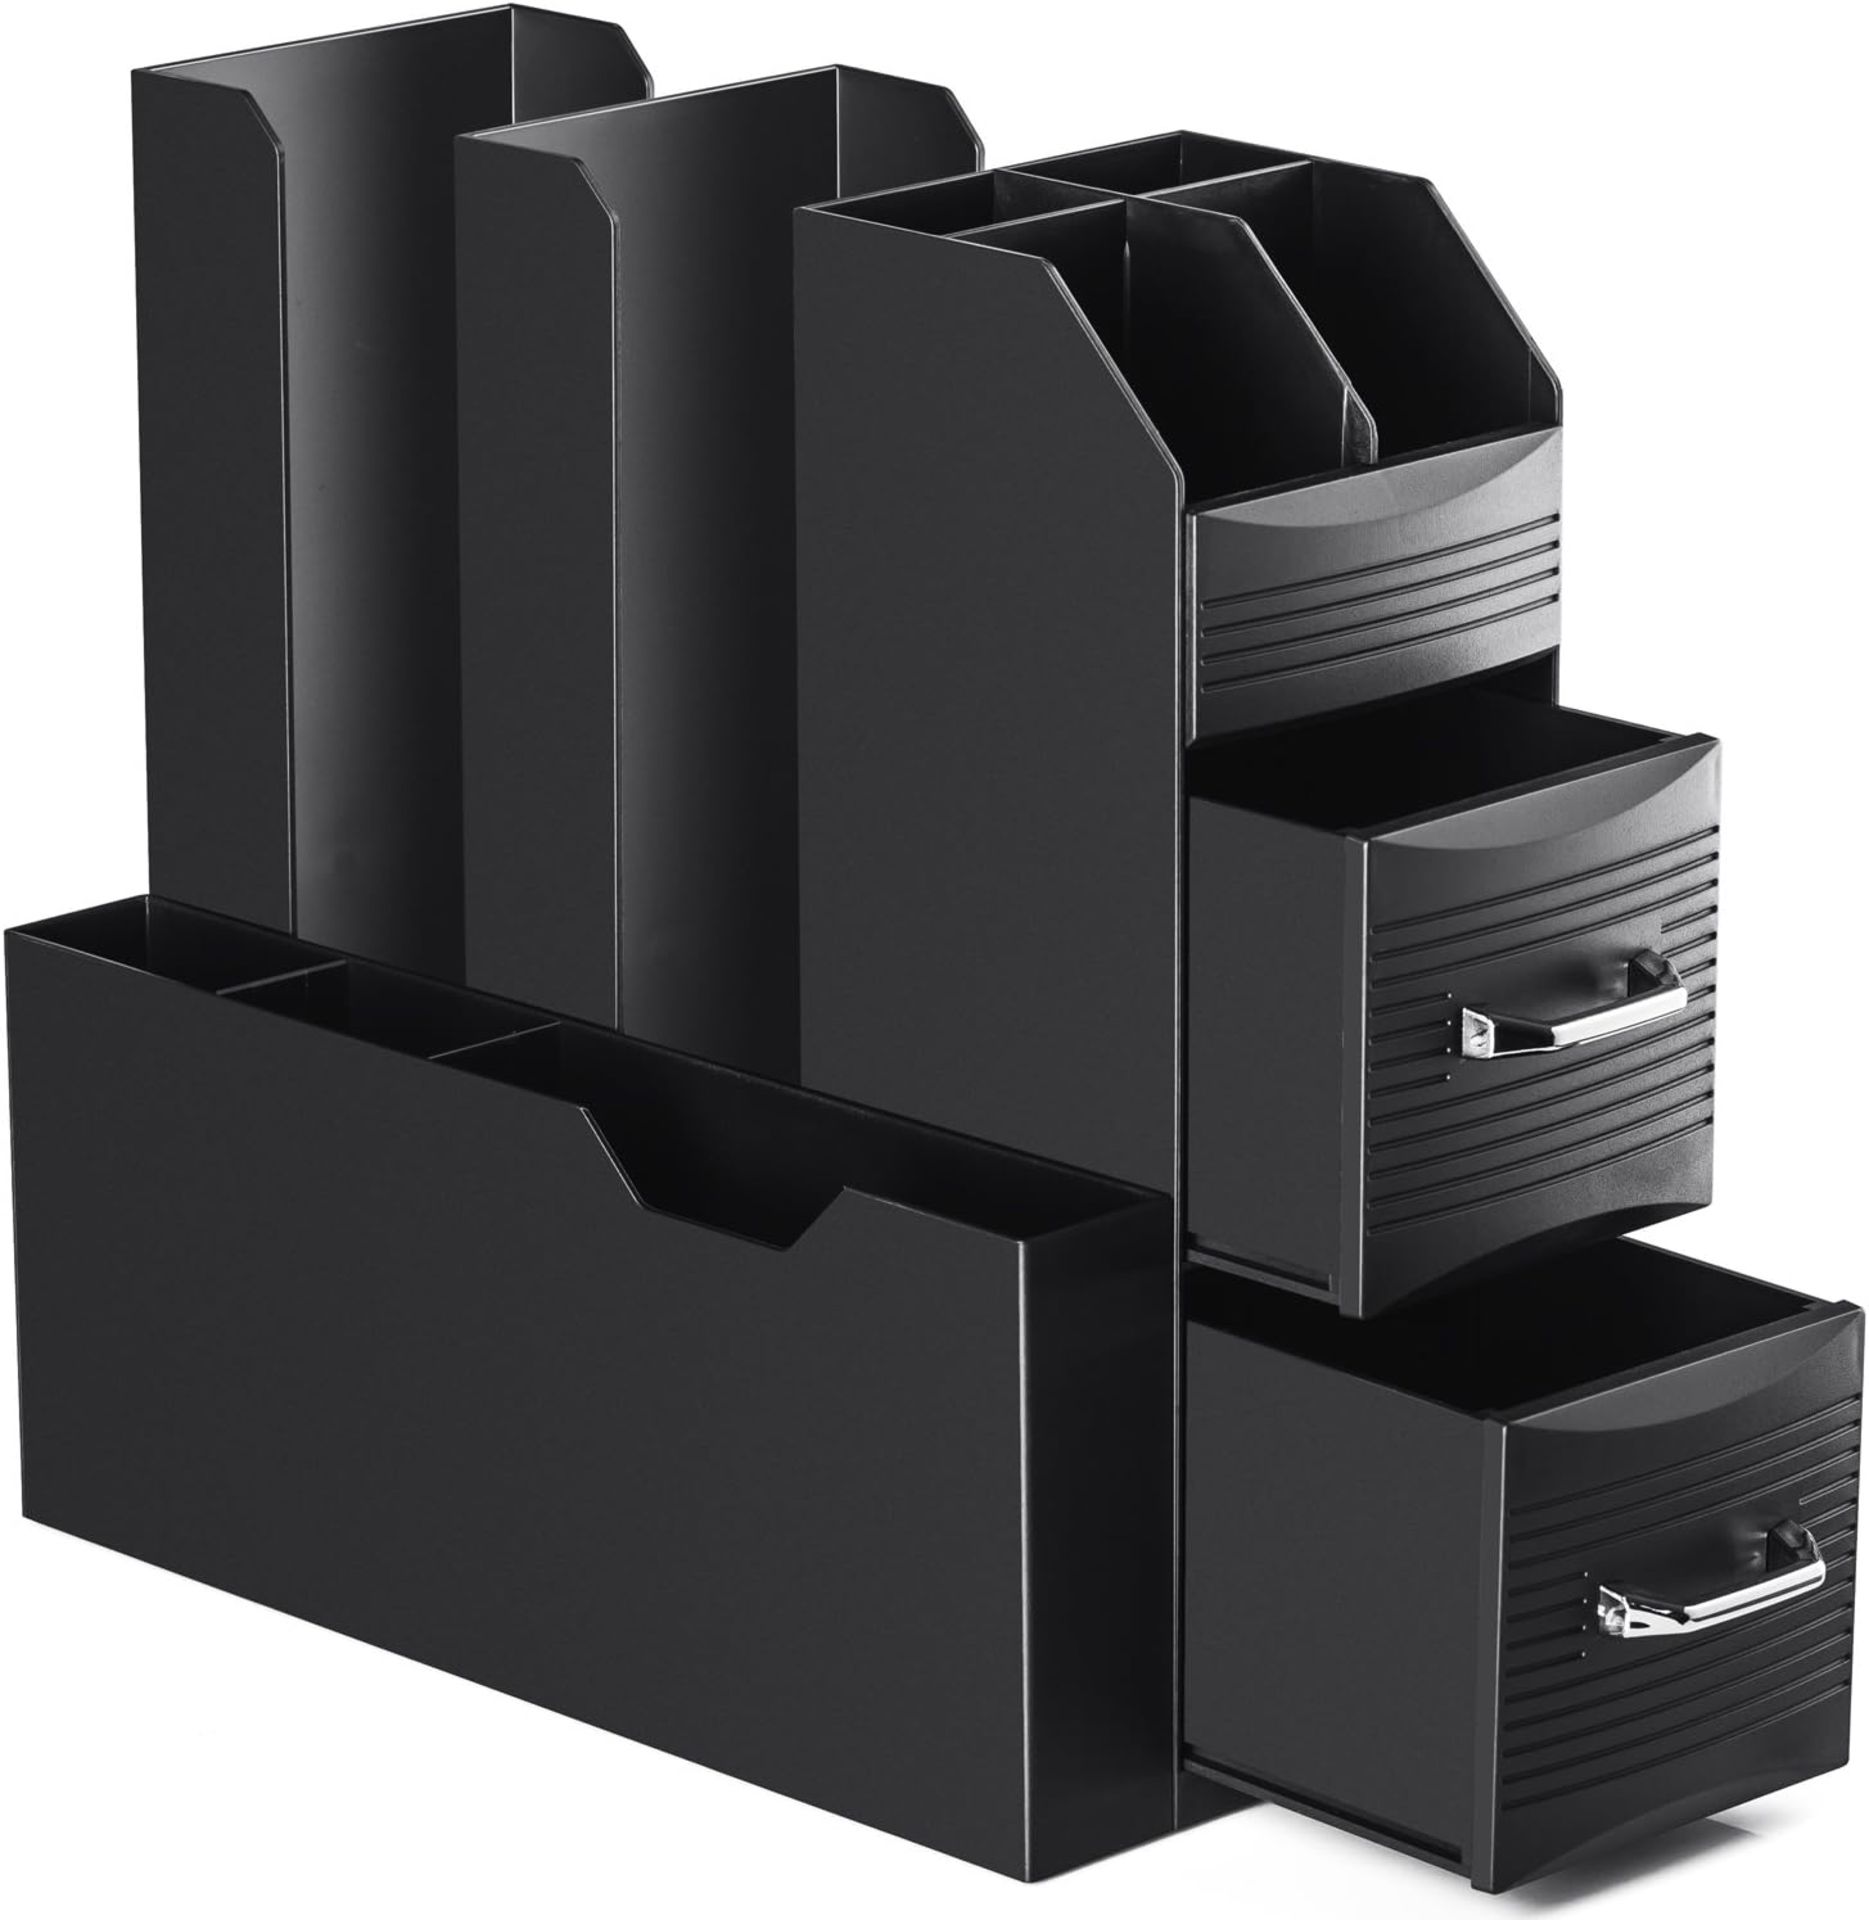 FULL PALLET OF BLACK HALTER COFFEE ACCESSORIES CADDY ORGANIZER - 9 COMPARTMENTS AND 2 DRAWERS - Image 2 of 6